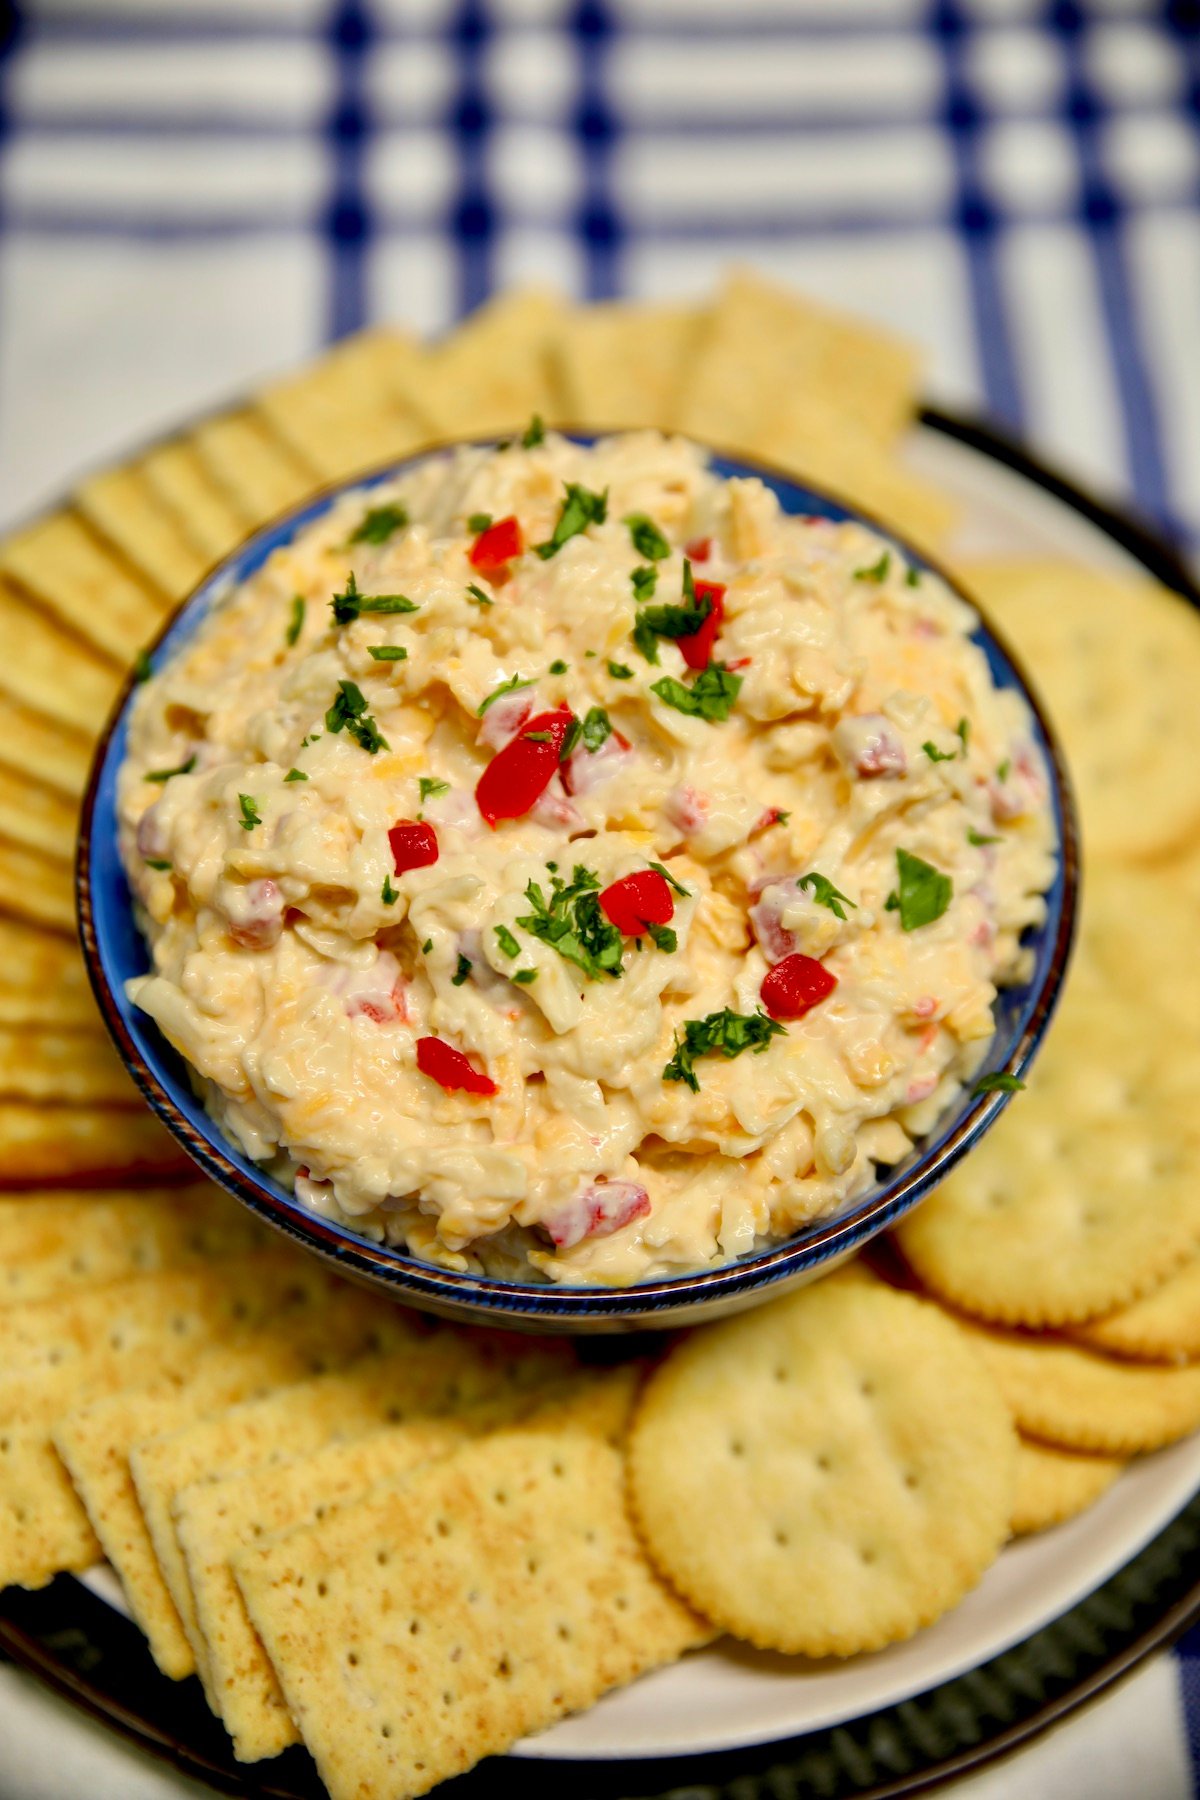 Bowl of pimento cheese on a plate of crackers.